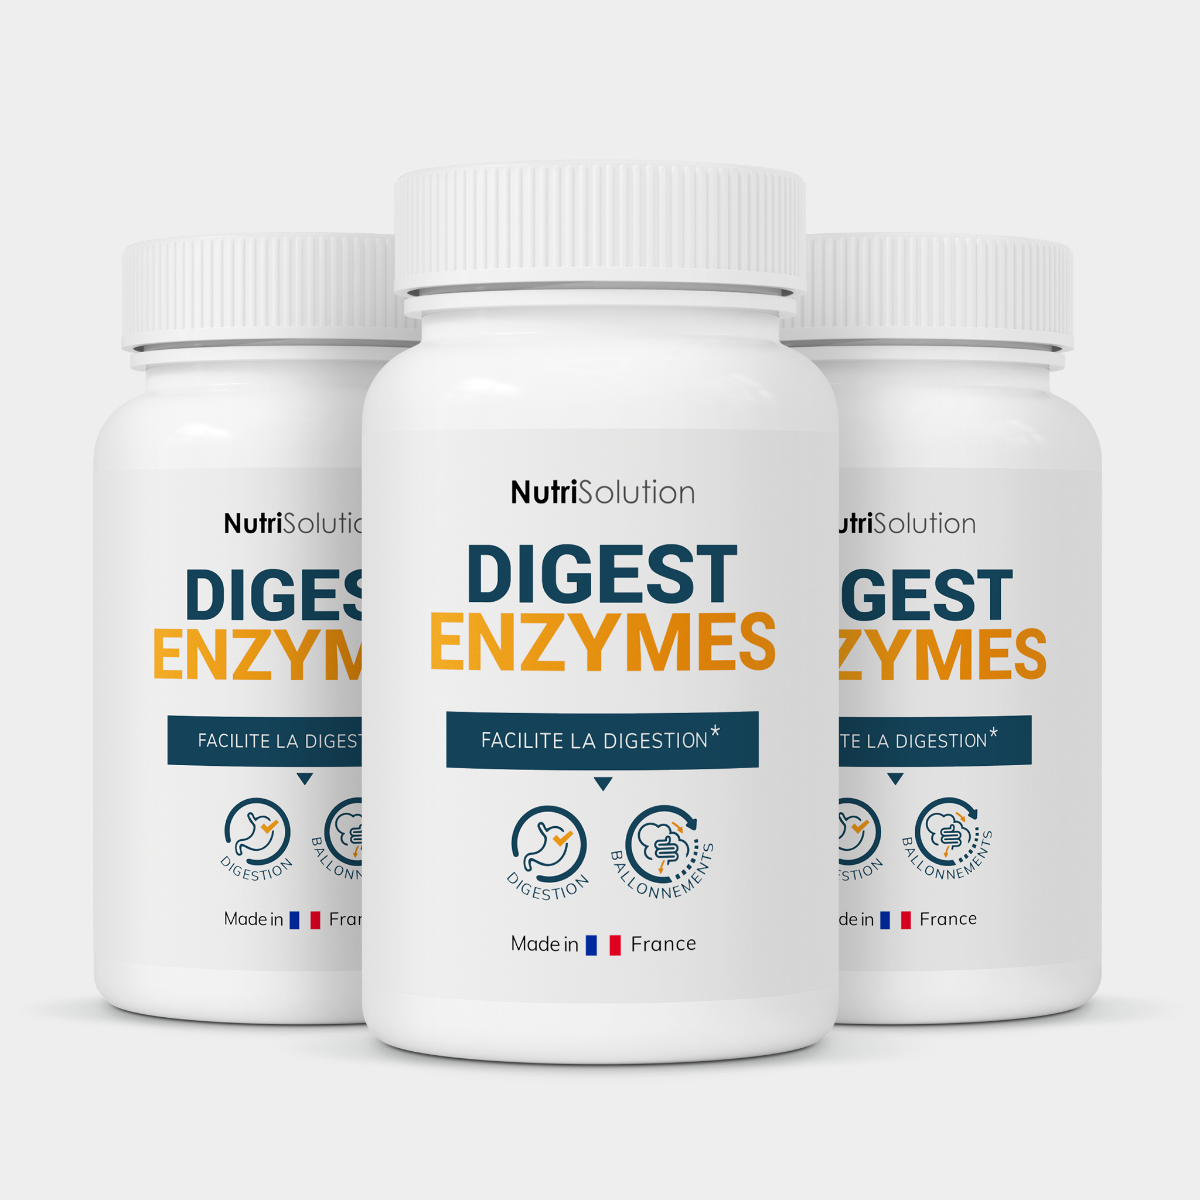 Digest Enzymes